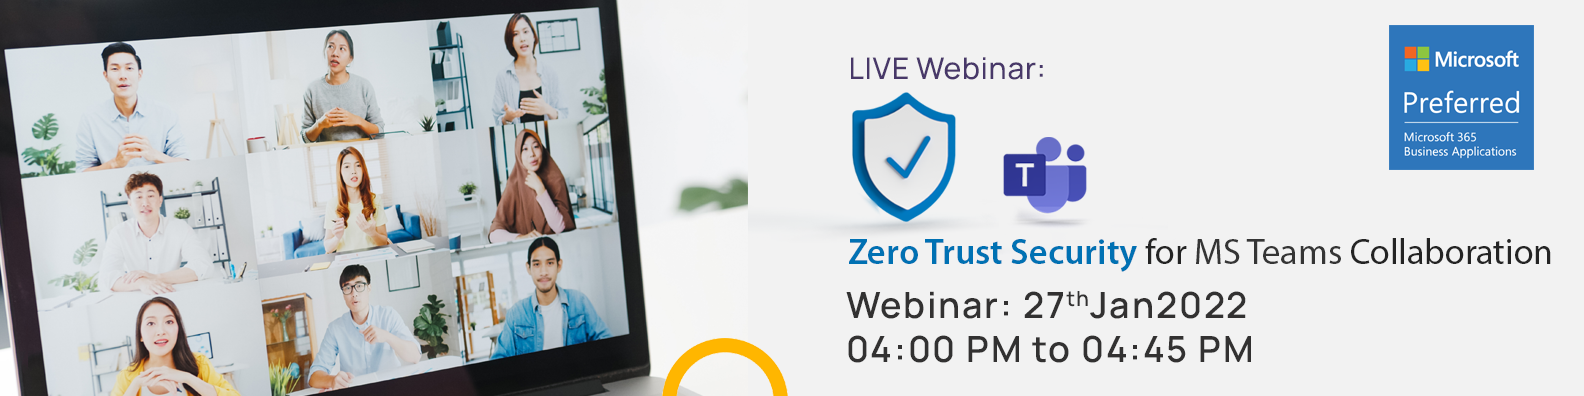 Zero Trust Security For MS Teams Collaboration